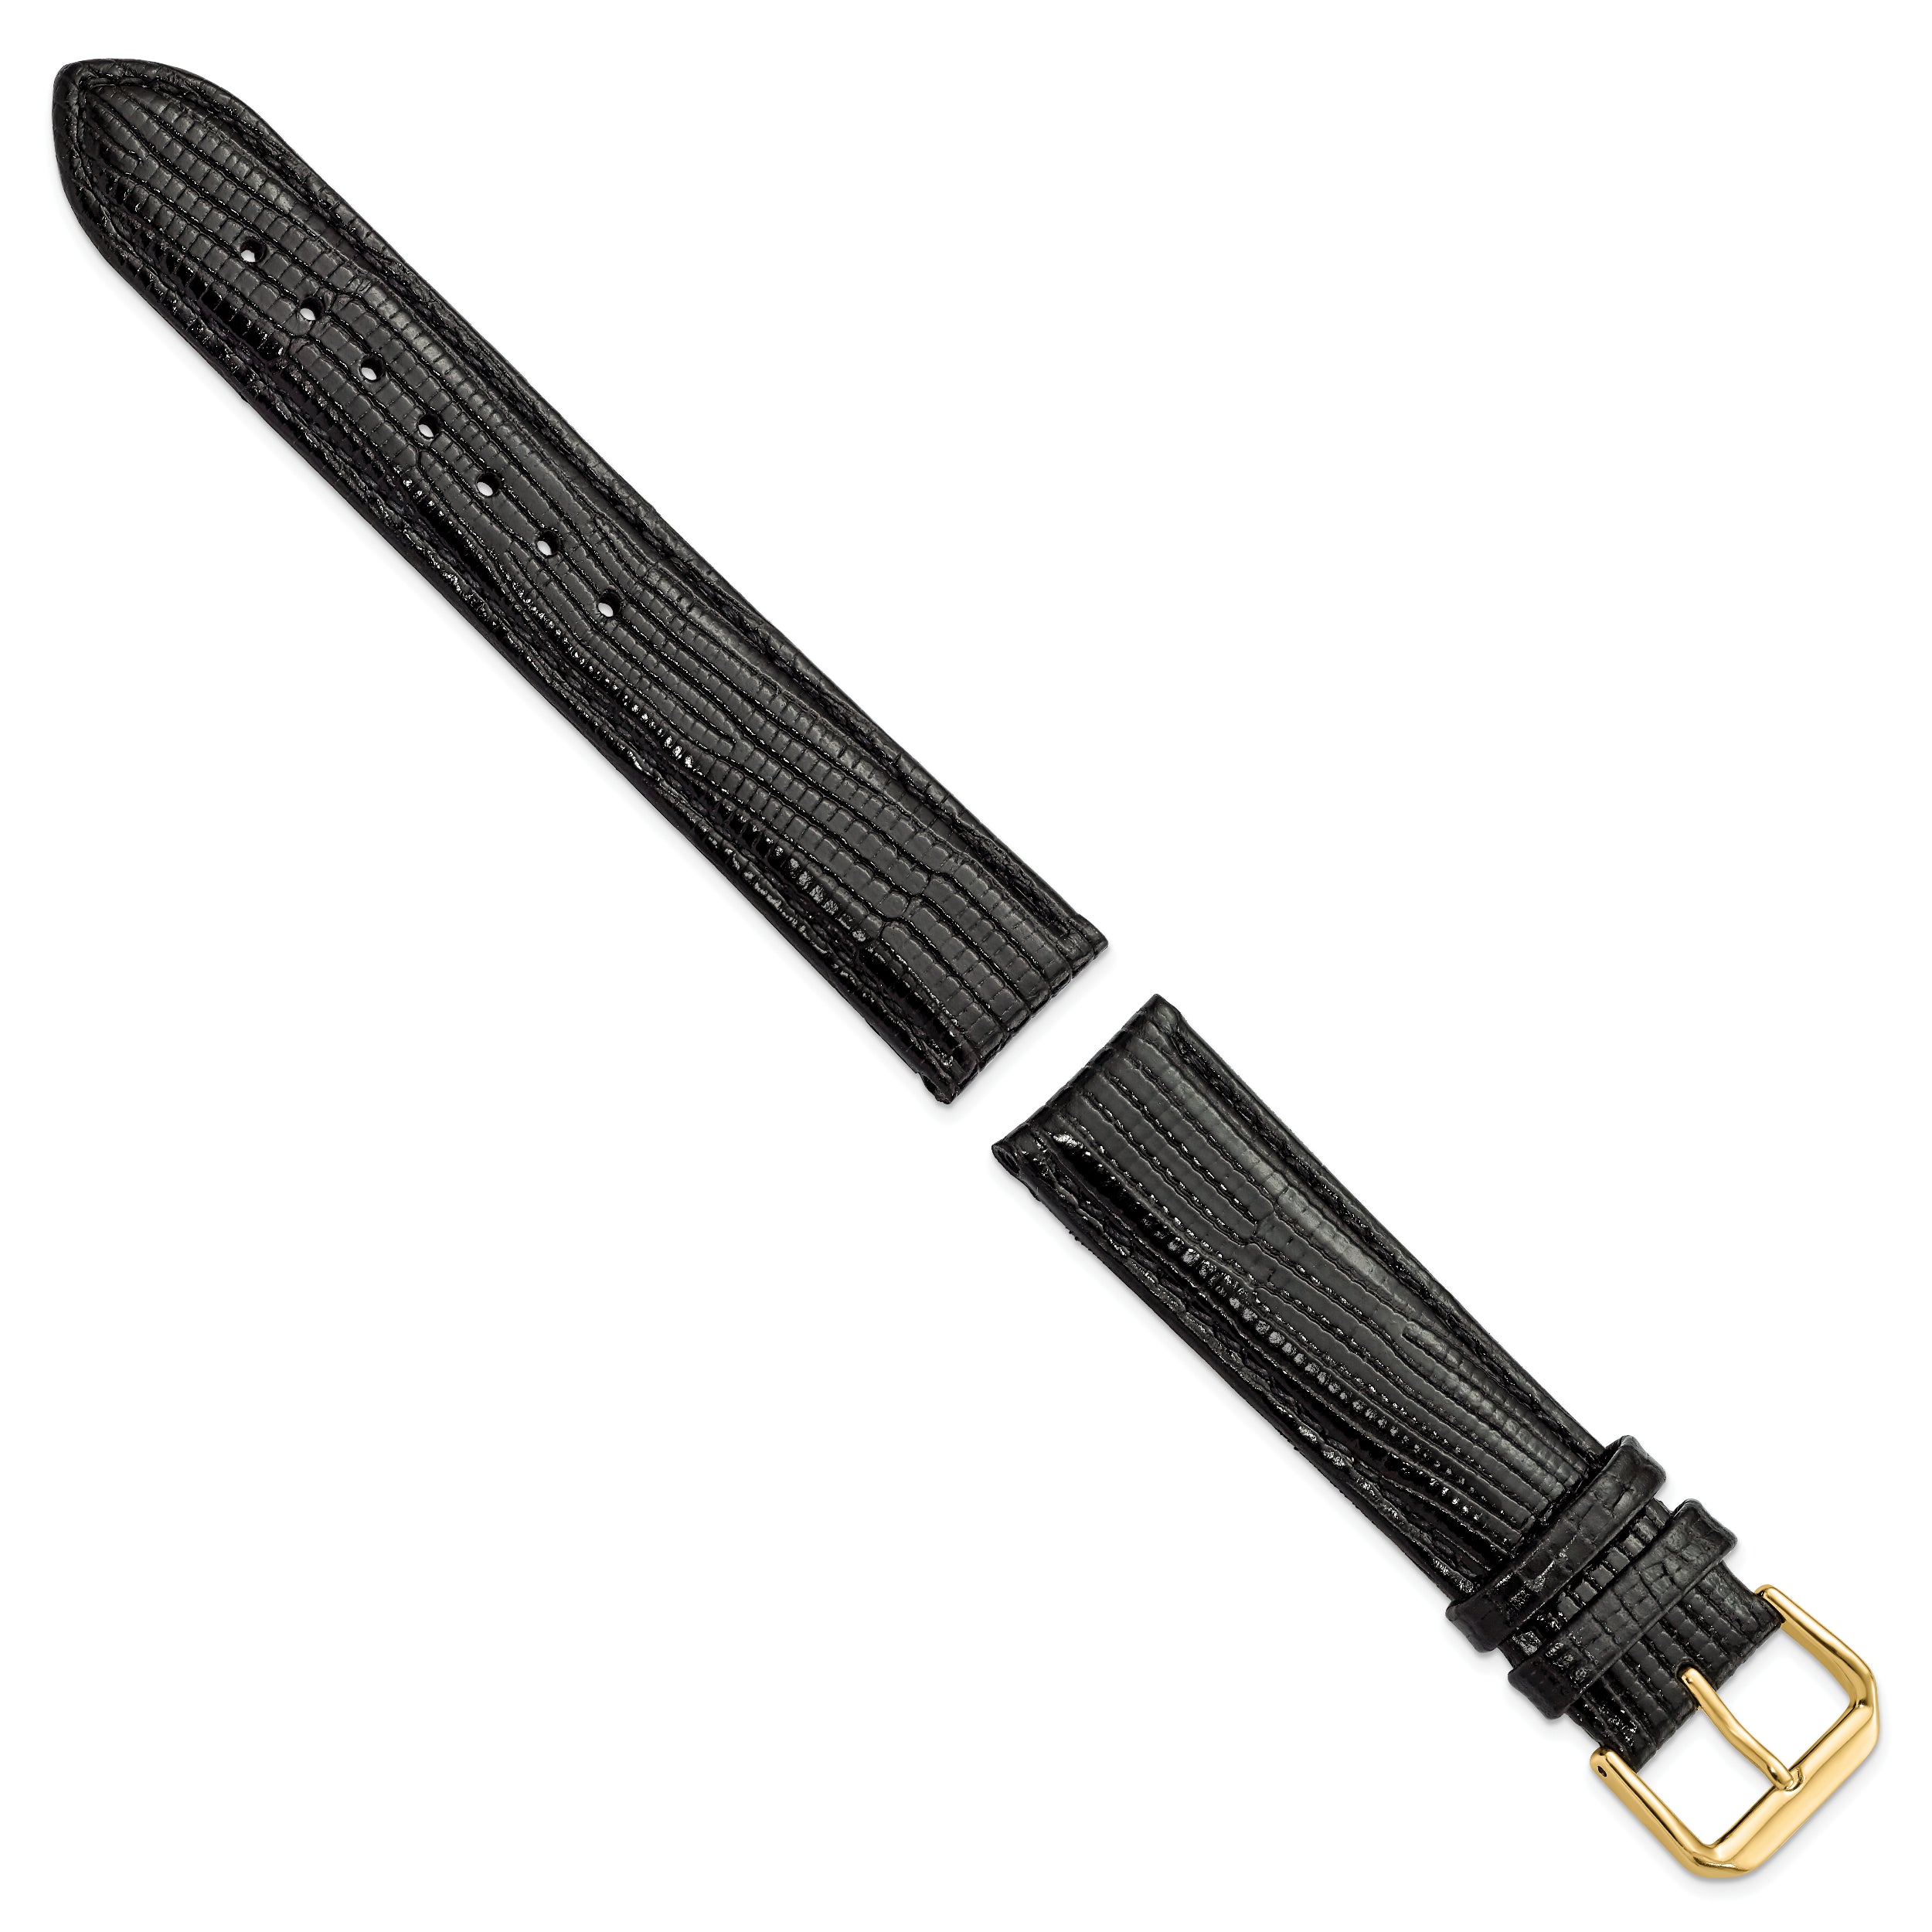 12mm Black Snake Grain Leather with Gold-tone Buckle 6.75 inch Watch Band